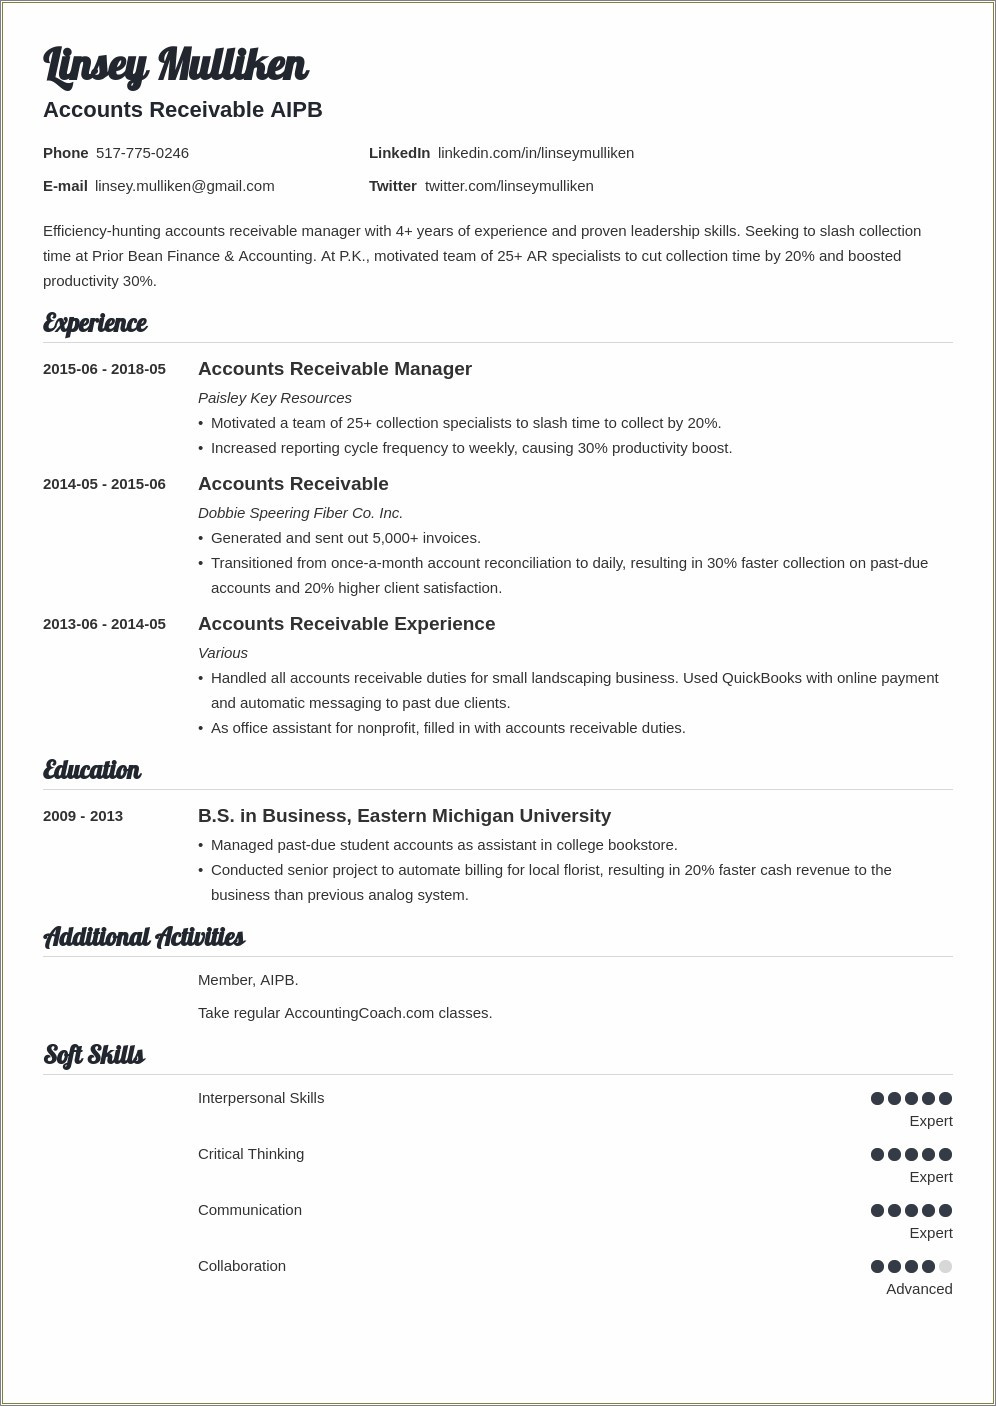 40 Accountant assistant Resume Samples Jobherojobhero Accounts Receivable and Accounts Payable Manager Resume – Resume …